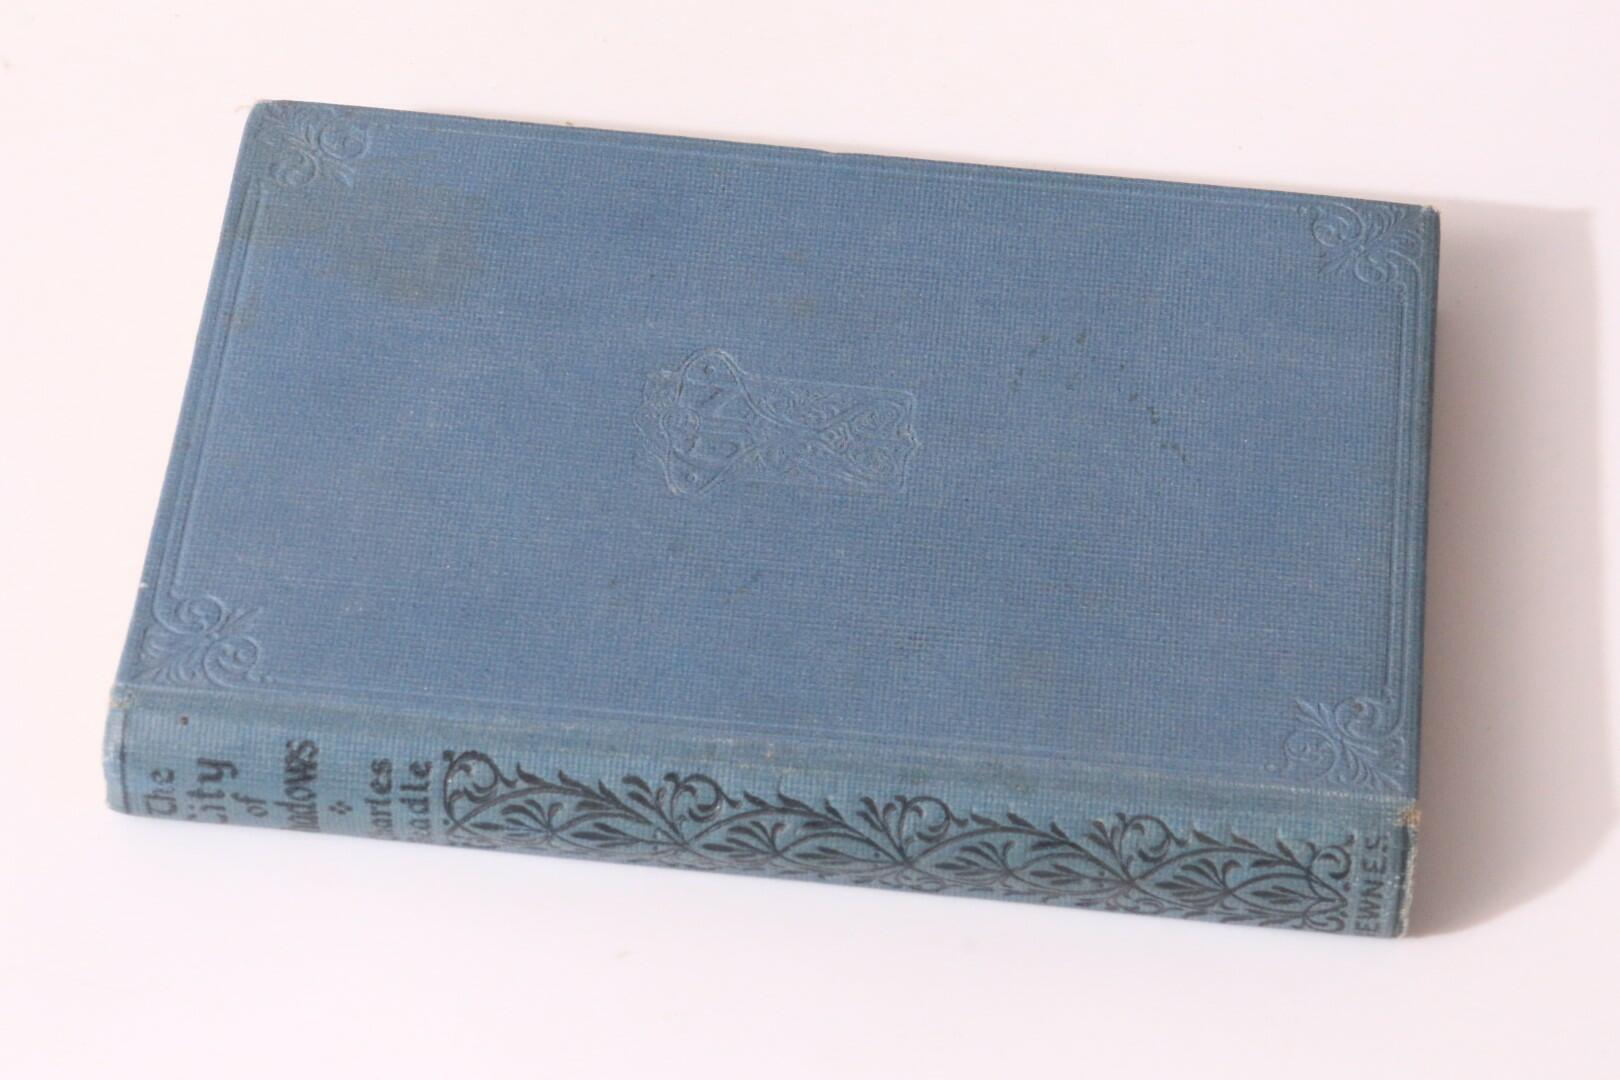 Charles Beadle - The City of Shadows - Everett & Co., n.d. [1911?], First Edition.